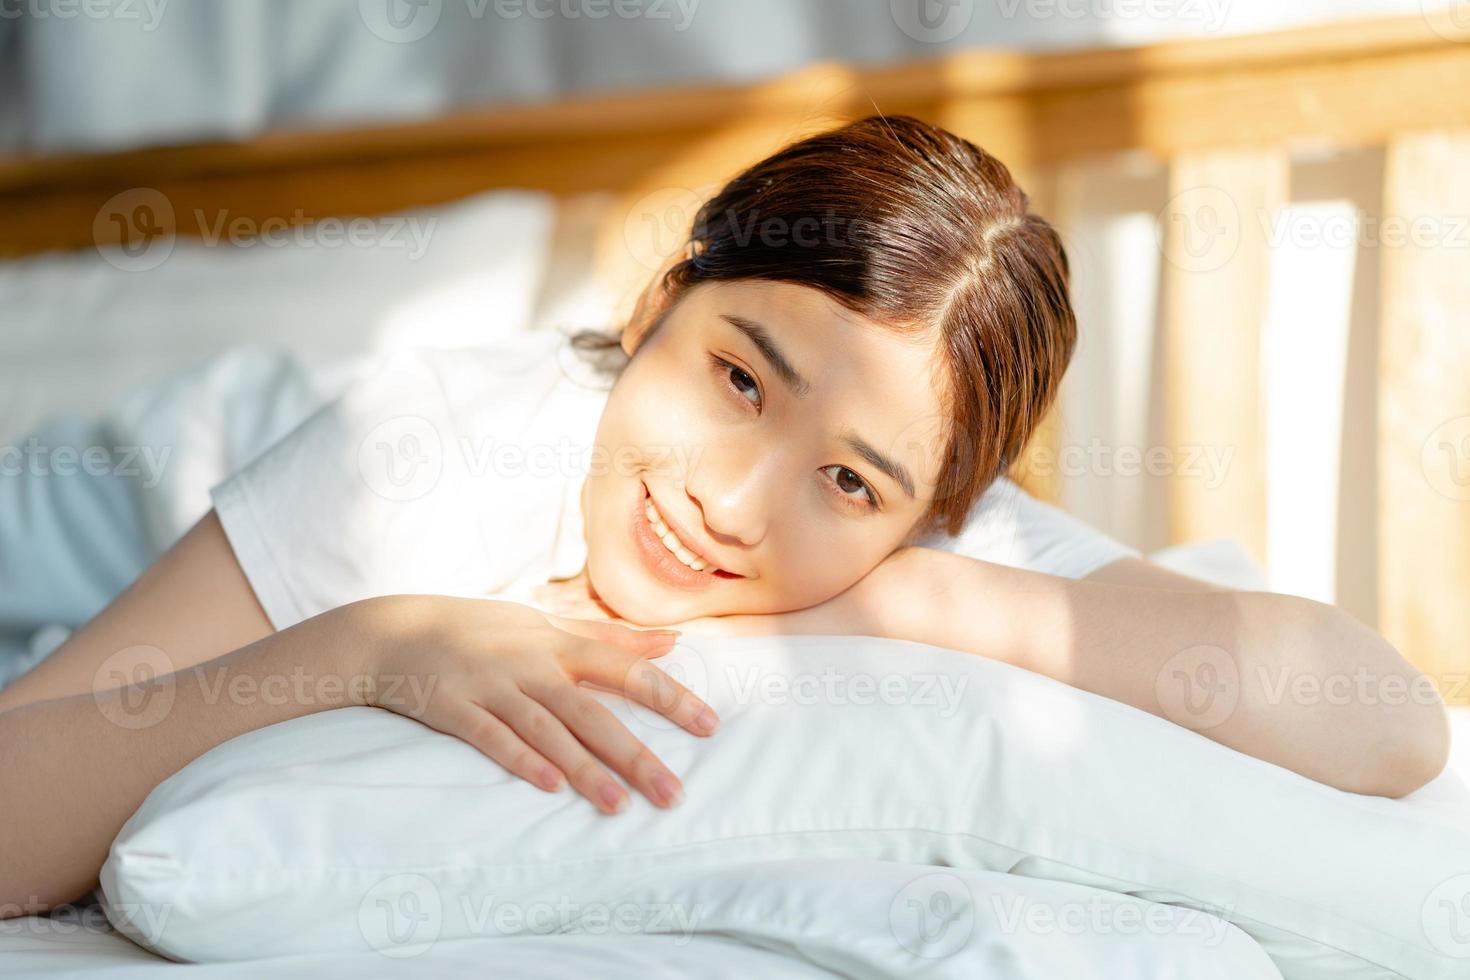 The beautiful Asian woman just woke up when the sun was up photo